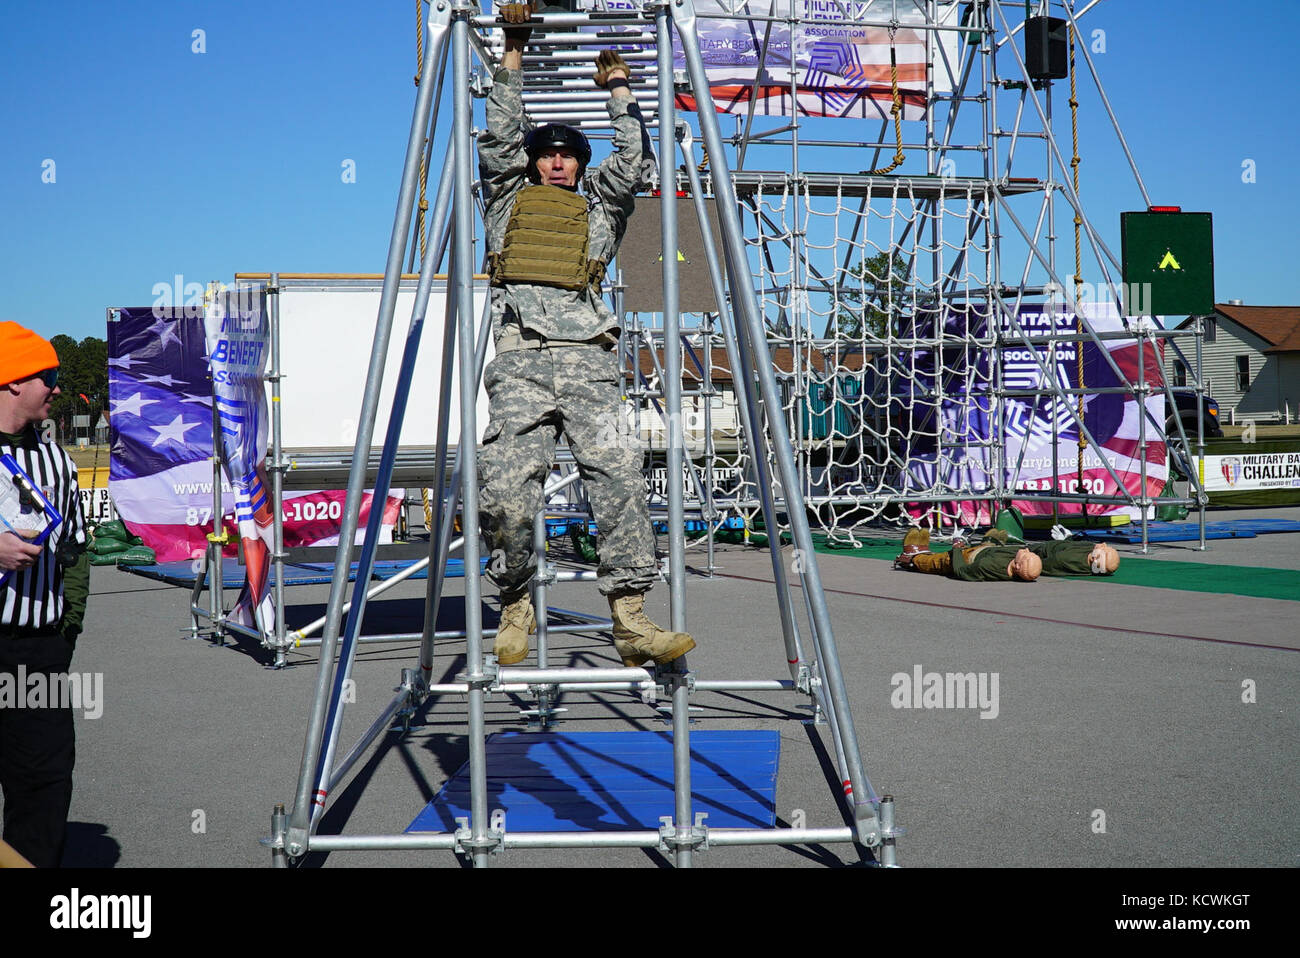 South Carolina State Guard Command Sgt. Maj. Clinton Parnell, Jr. competes in the “Battle Challenge” mobile obstacle course at McCrady Training Center in Eastover, South Carolina, Jan. 28, 2017. The Battle Challenge requires participants to perform nine tasks under pressure of time, including a cargo net climb, a knotted rope descent, wall surmount, ammunition resupply, low crawl, gas can carry, marksmanship tasks, and a service member-down rescue. (U.S. Army National Guard photo by Capt. Brian Hare) Stock Photo